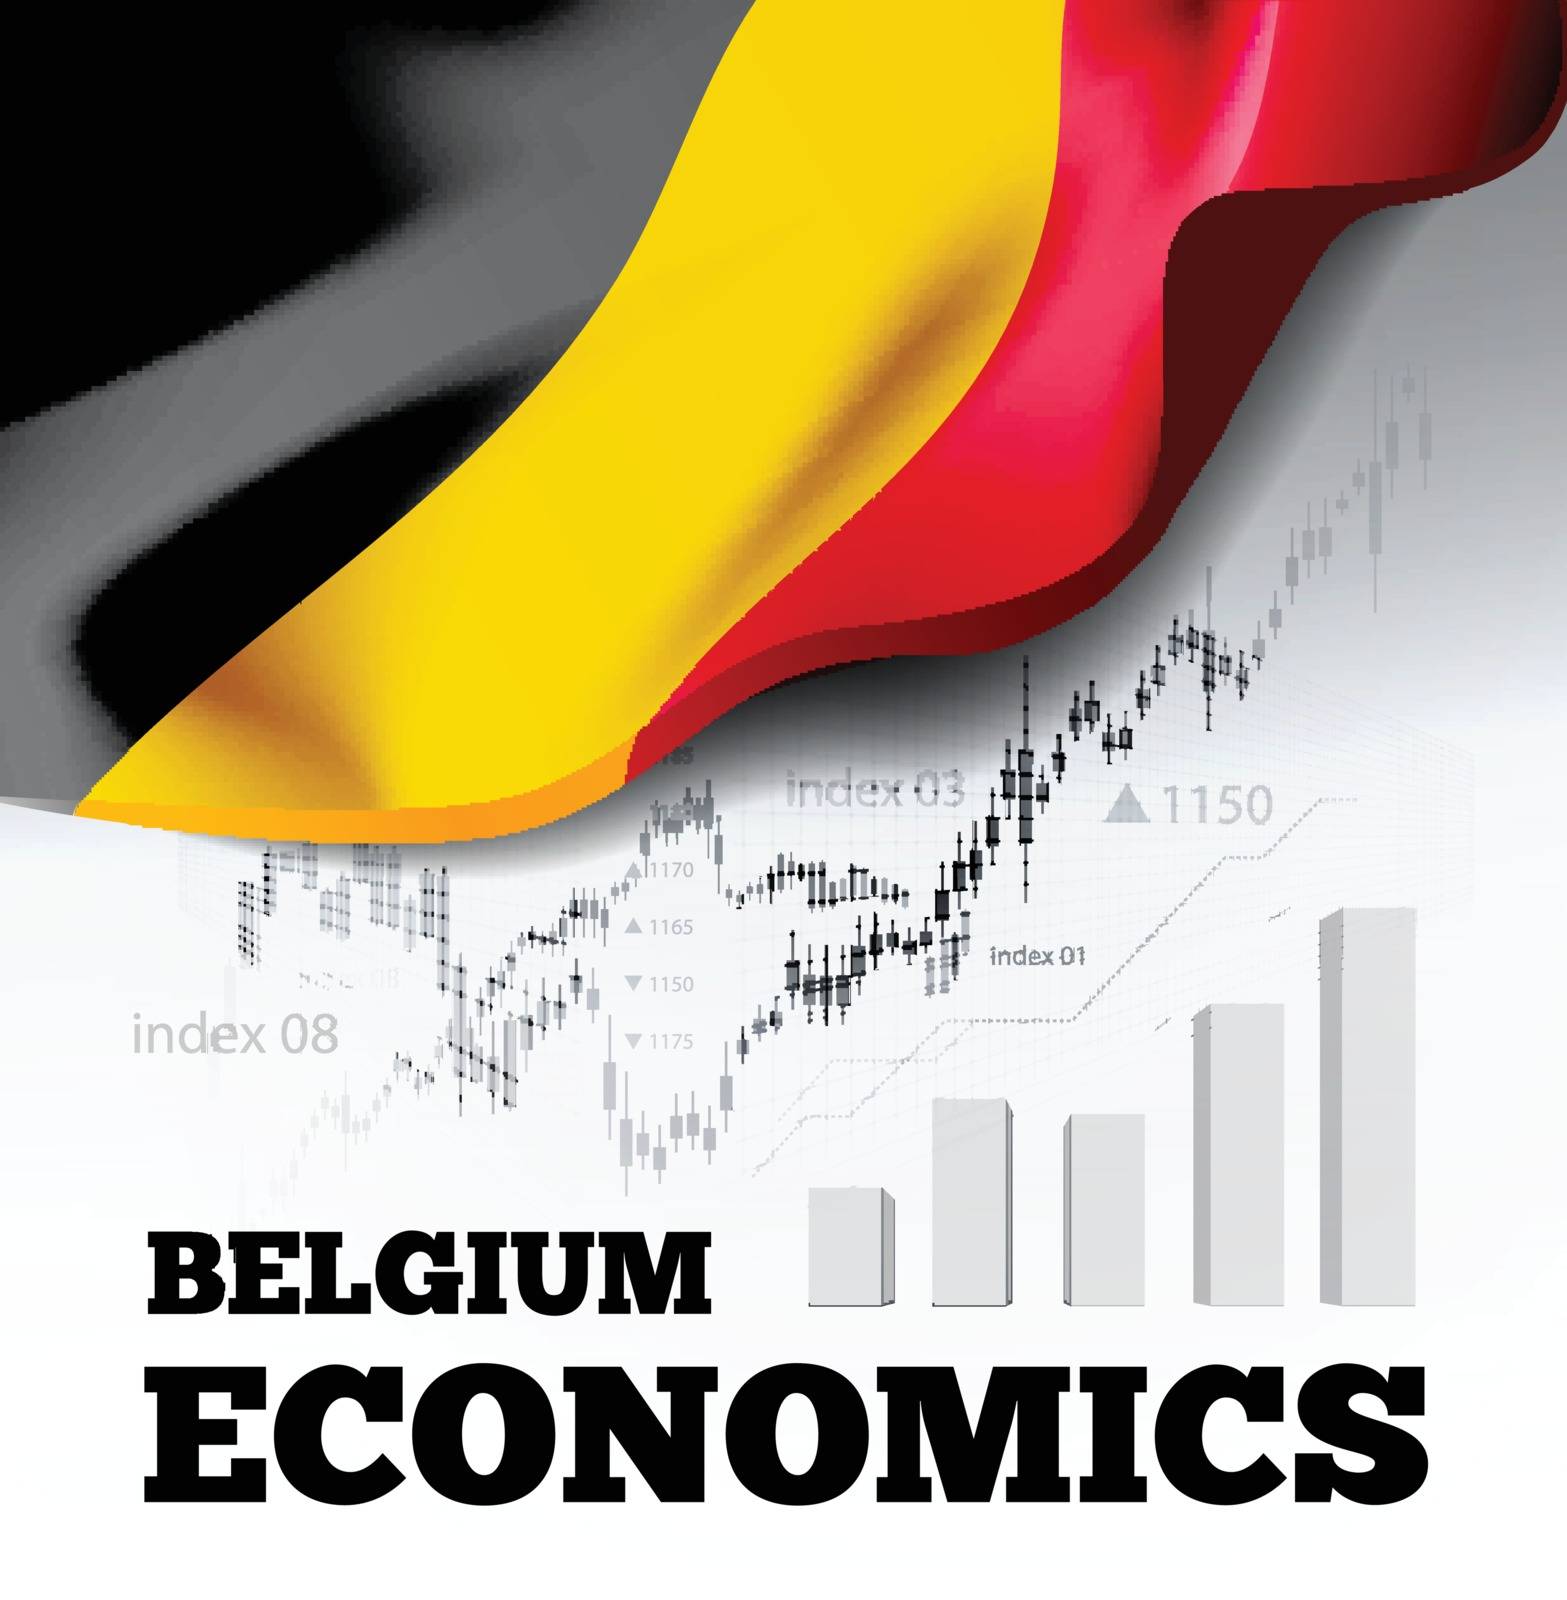 Belgium economics vector illustration with the flag of Belgium and business chart, bar chart stock numbers bull market, uptrend line graph symbolizes the welfare growth